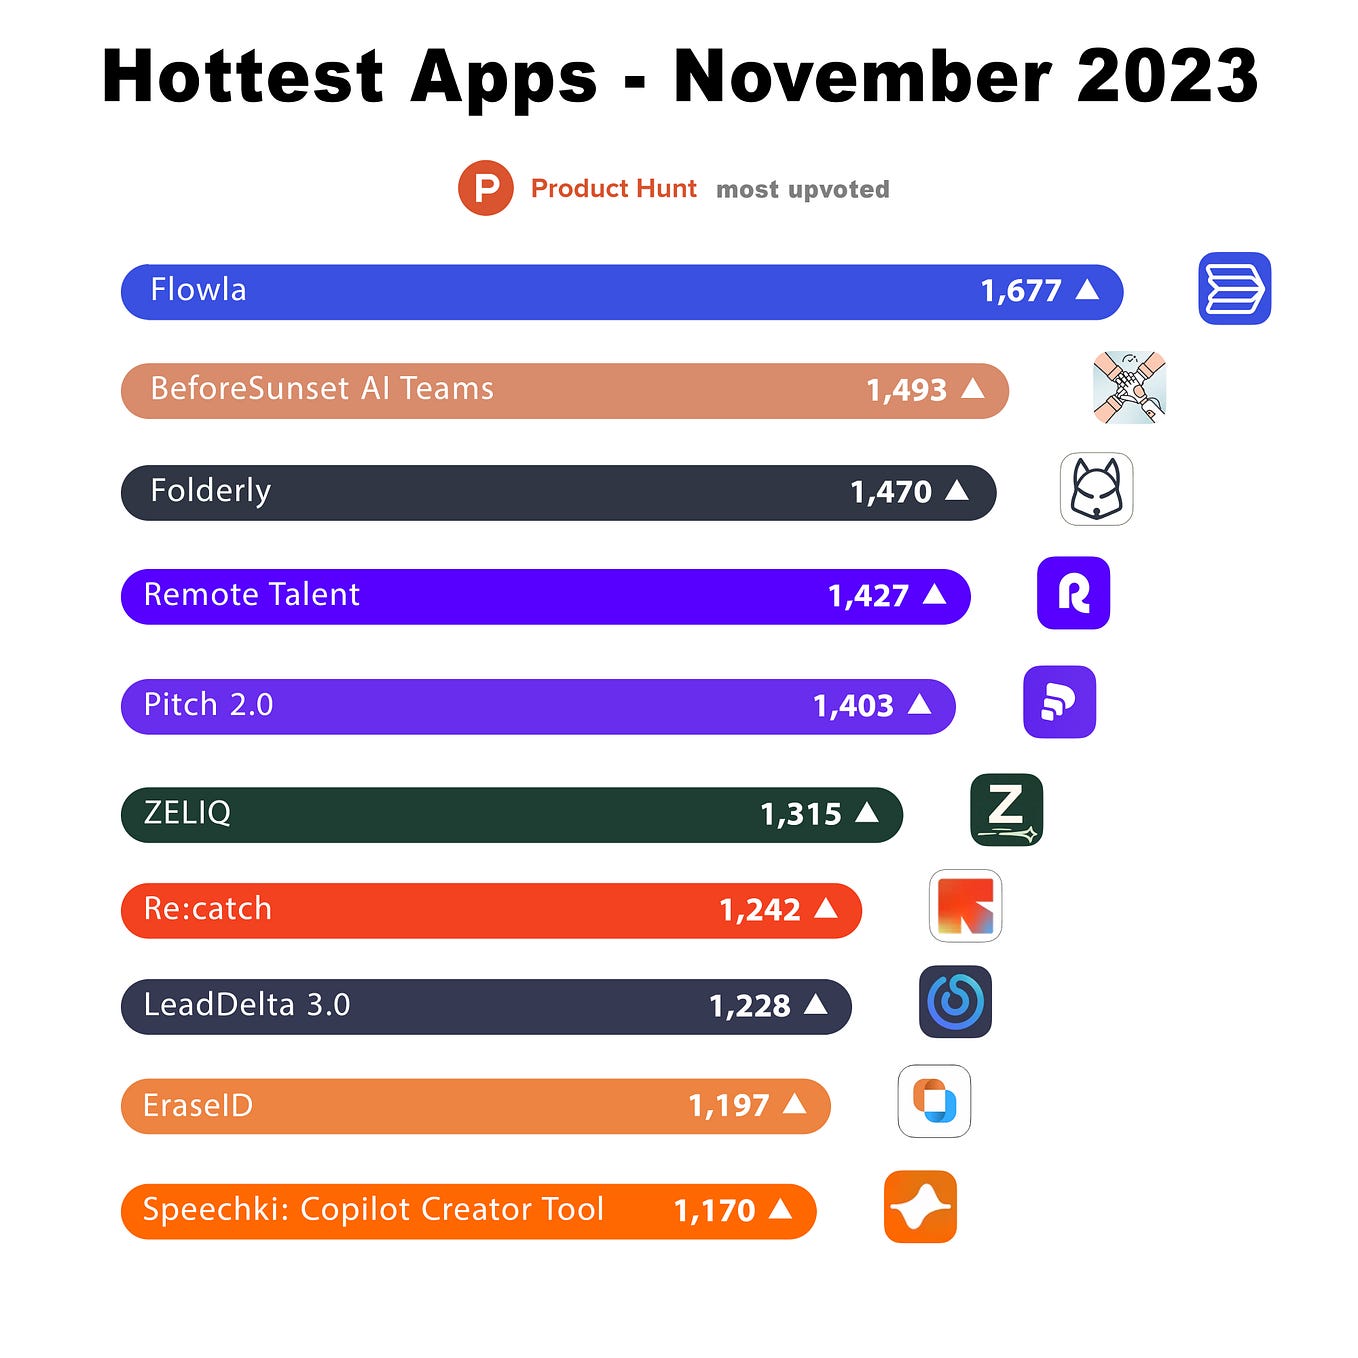 Best Live Streaming Apps ᐈ Top 4 for Gaming in 2023